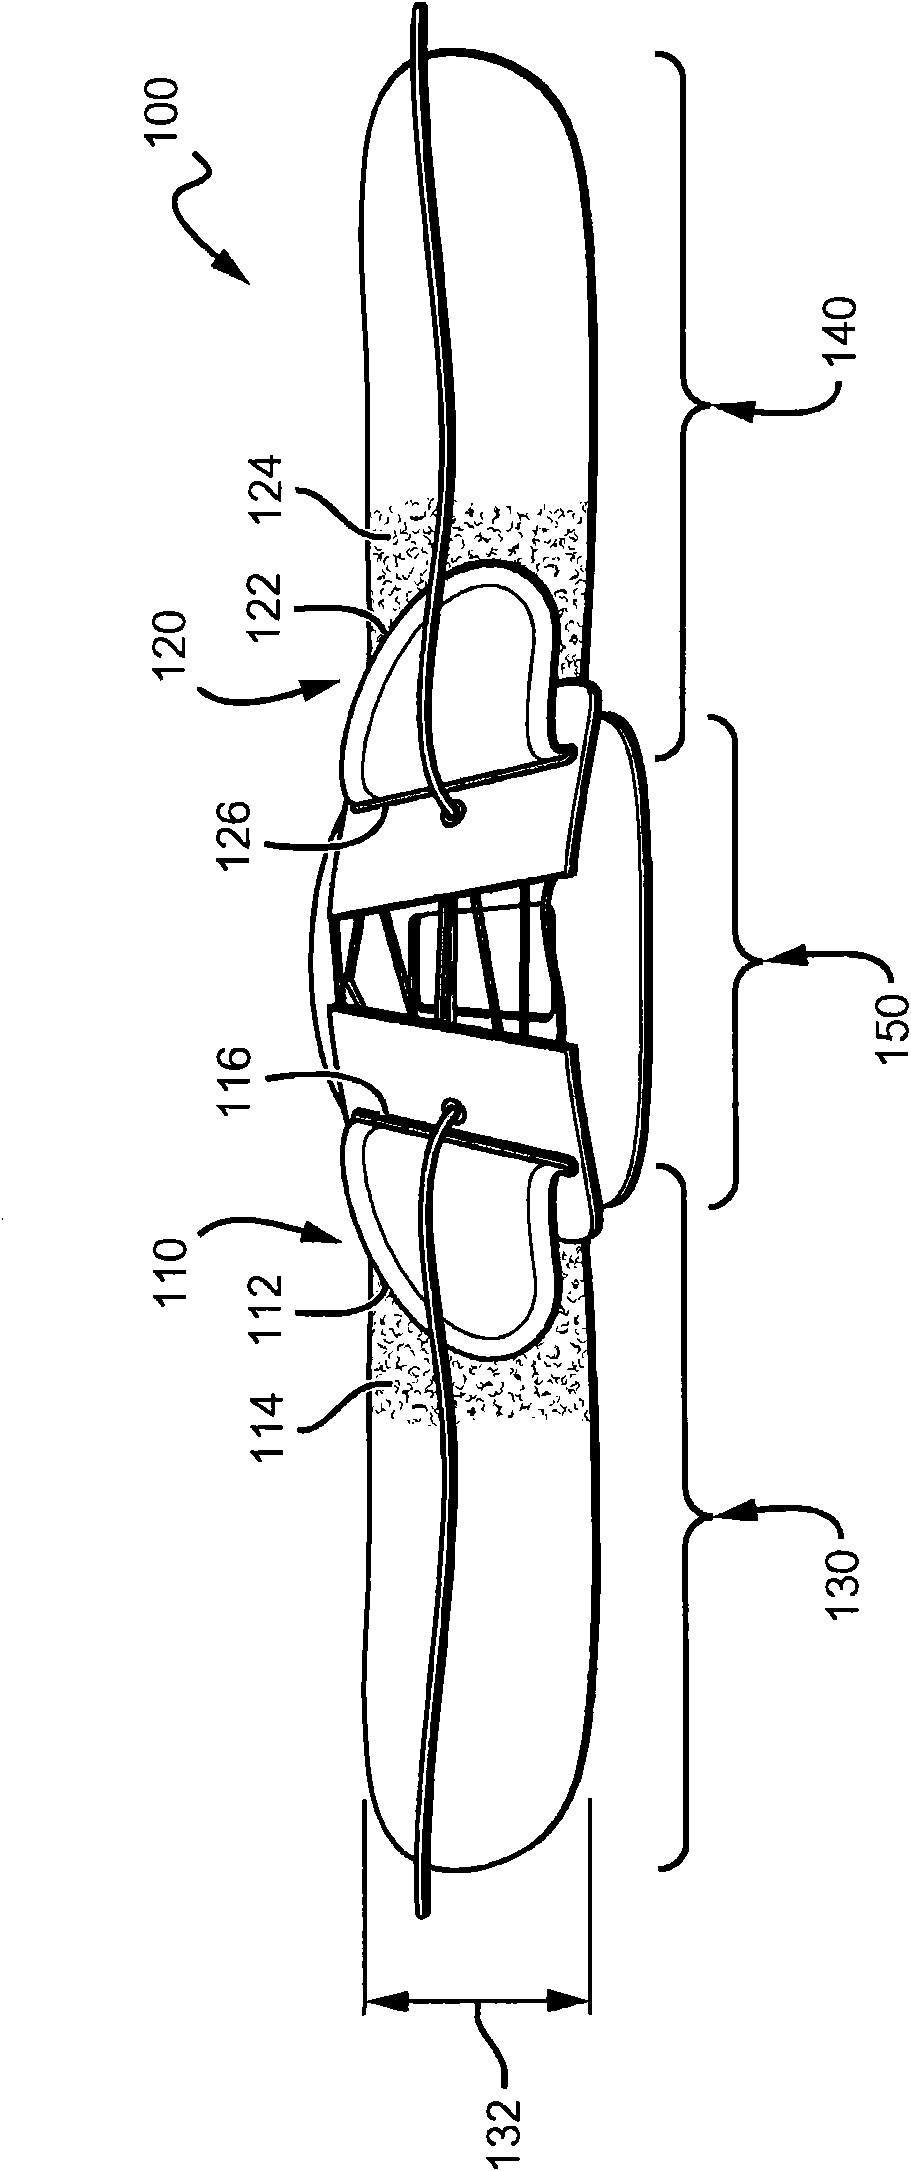 Highly adjustable lumbar support and methods